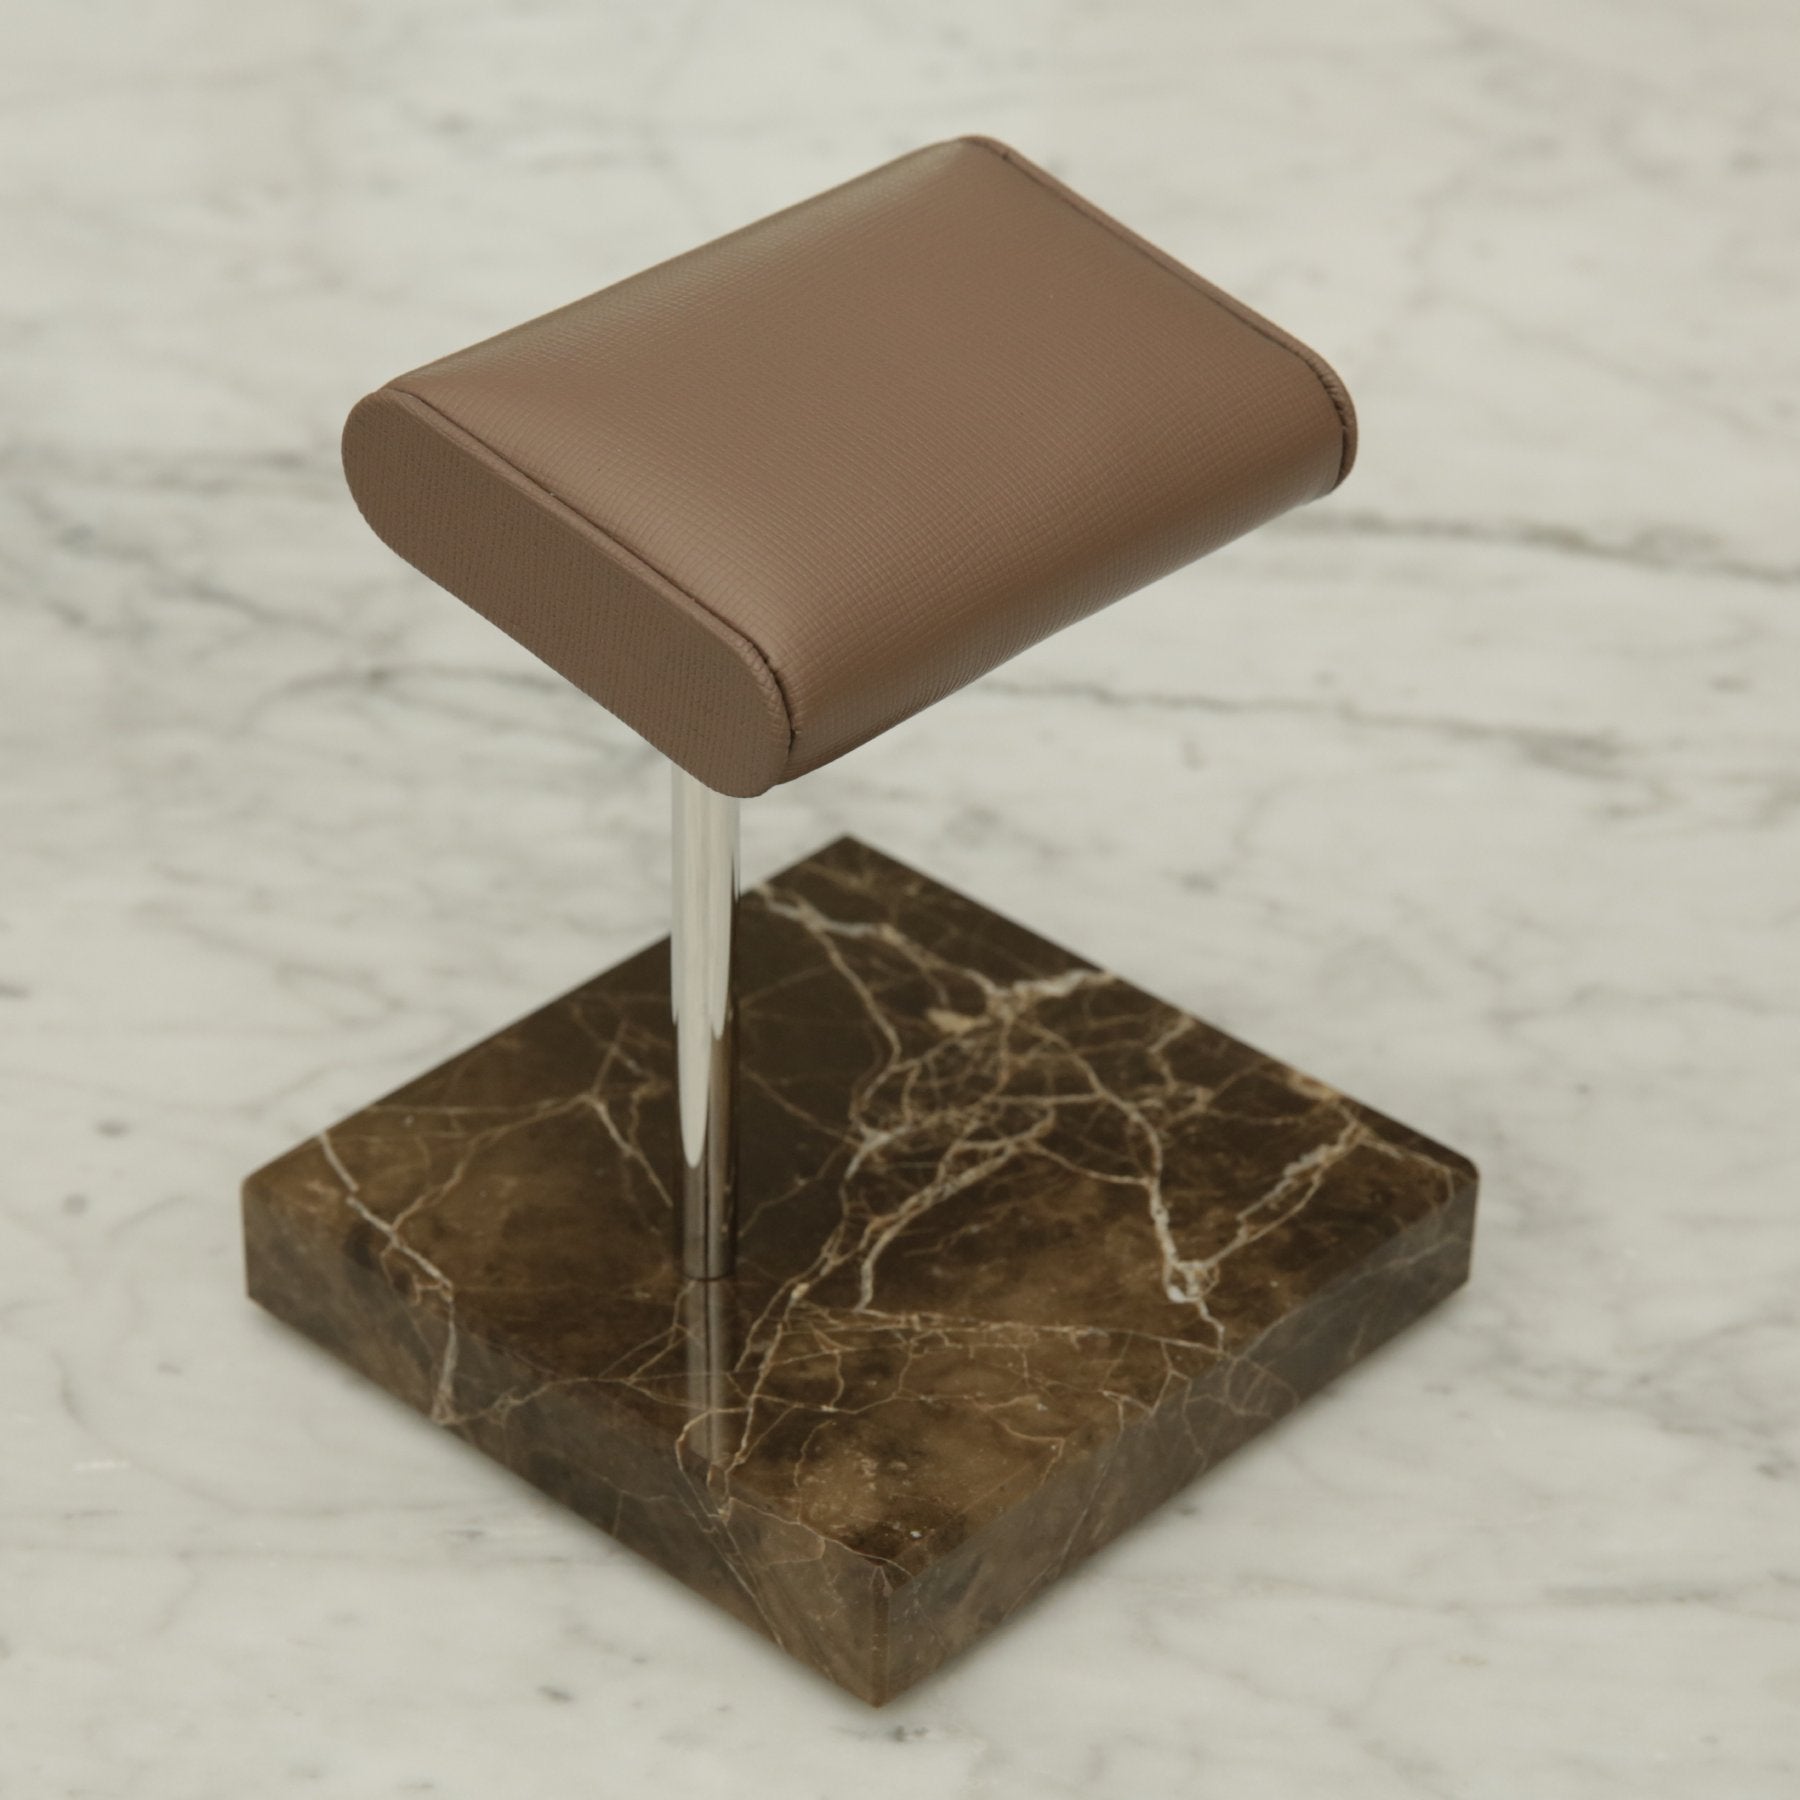 WATCH STAND CLASSIC - SINGLE - BROWN & BROWN SAFFIANO